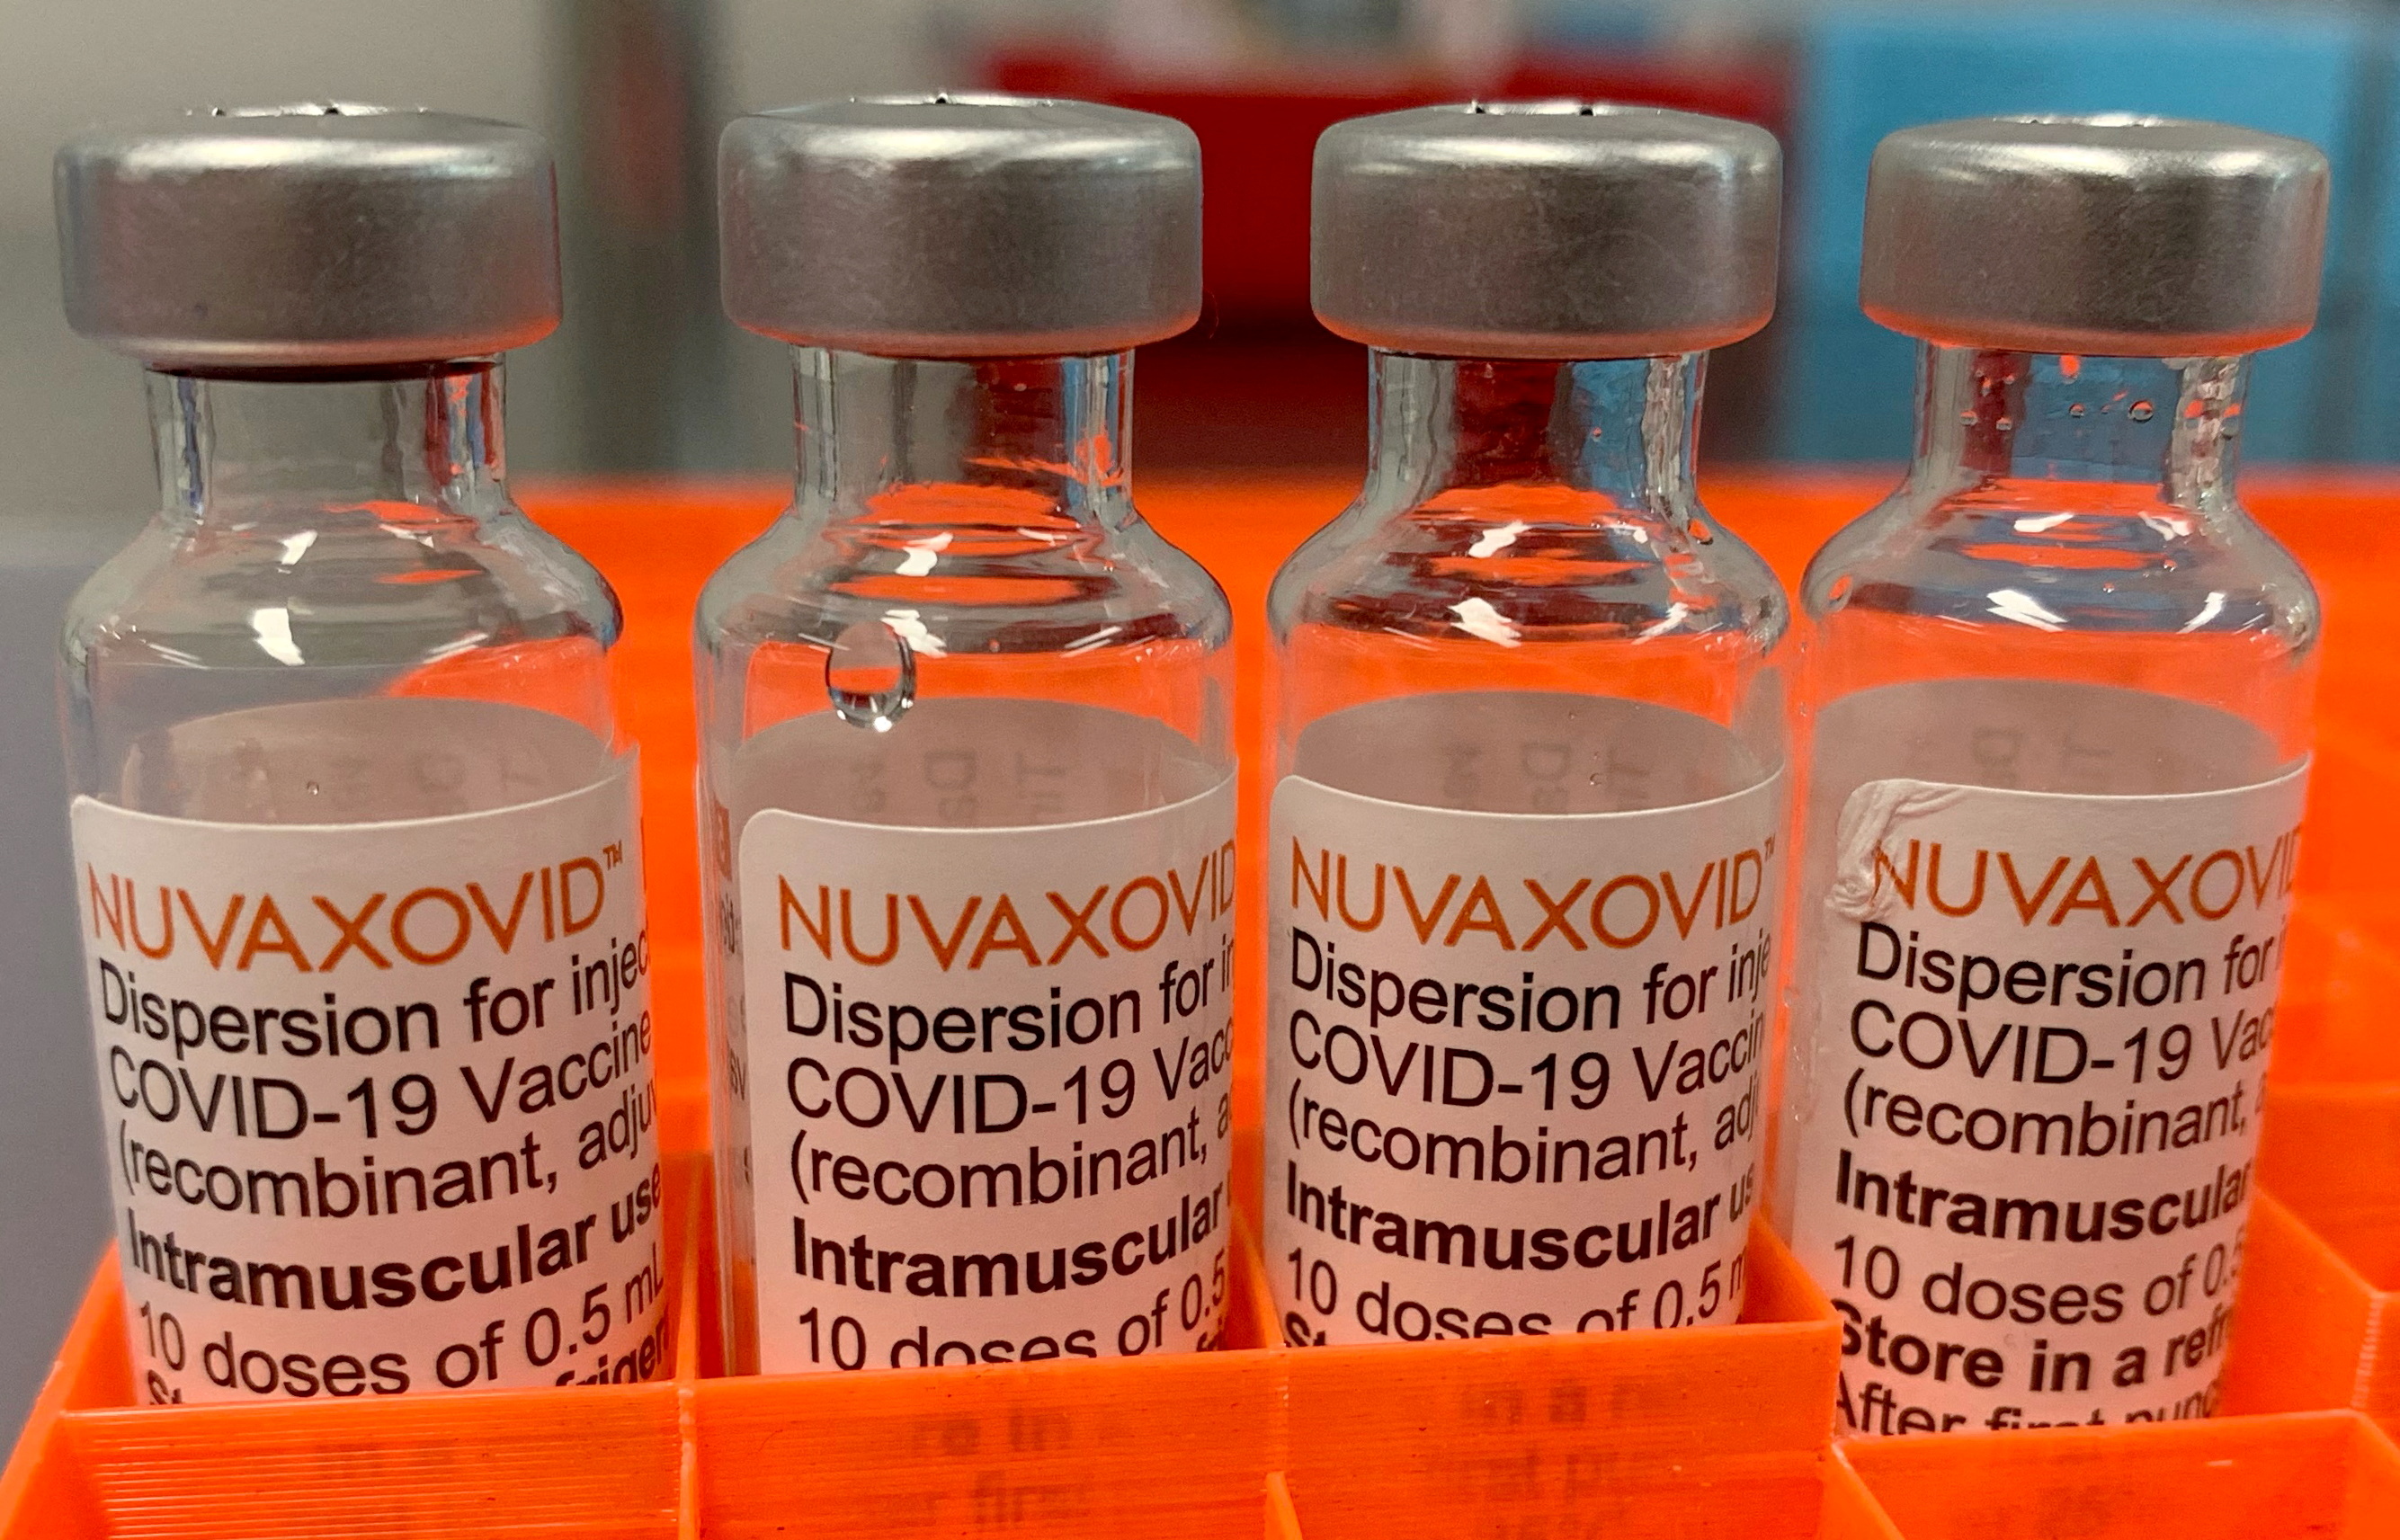 Germany starts vaccinating with Novavax